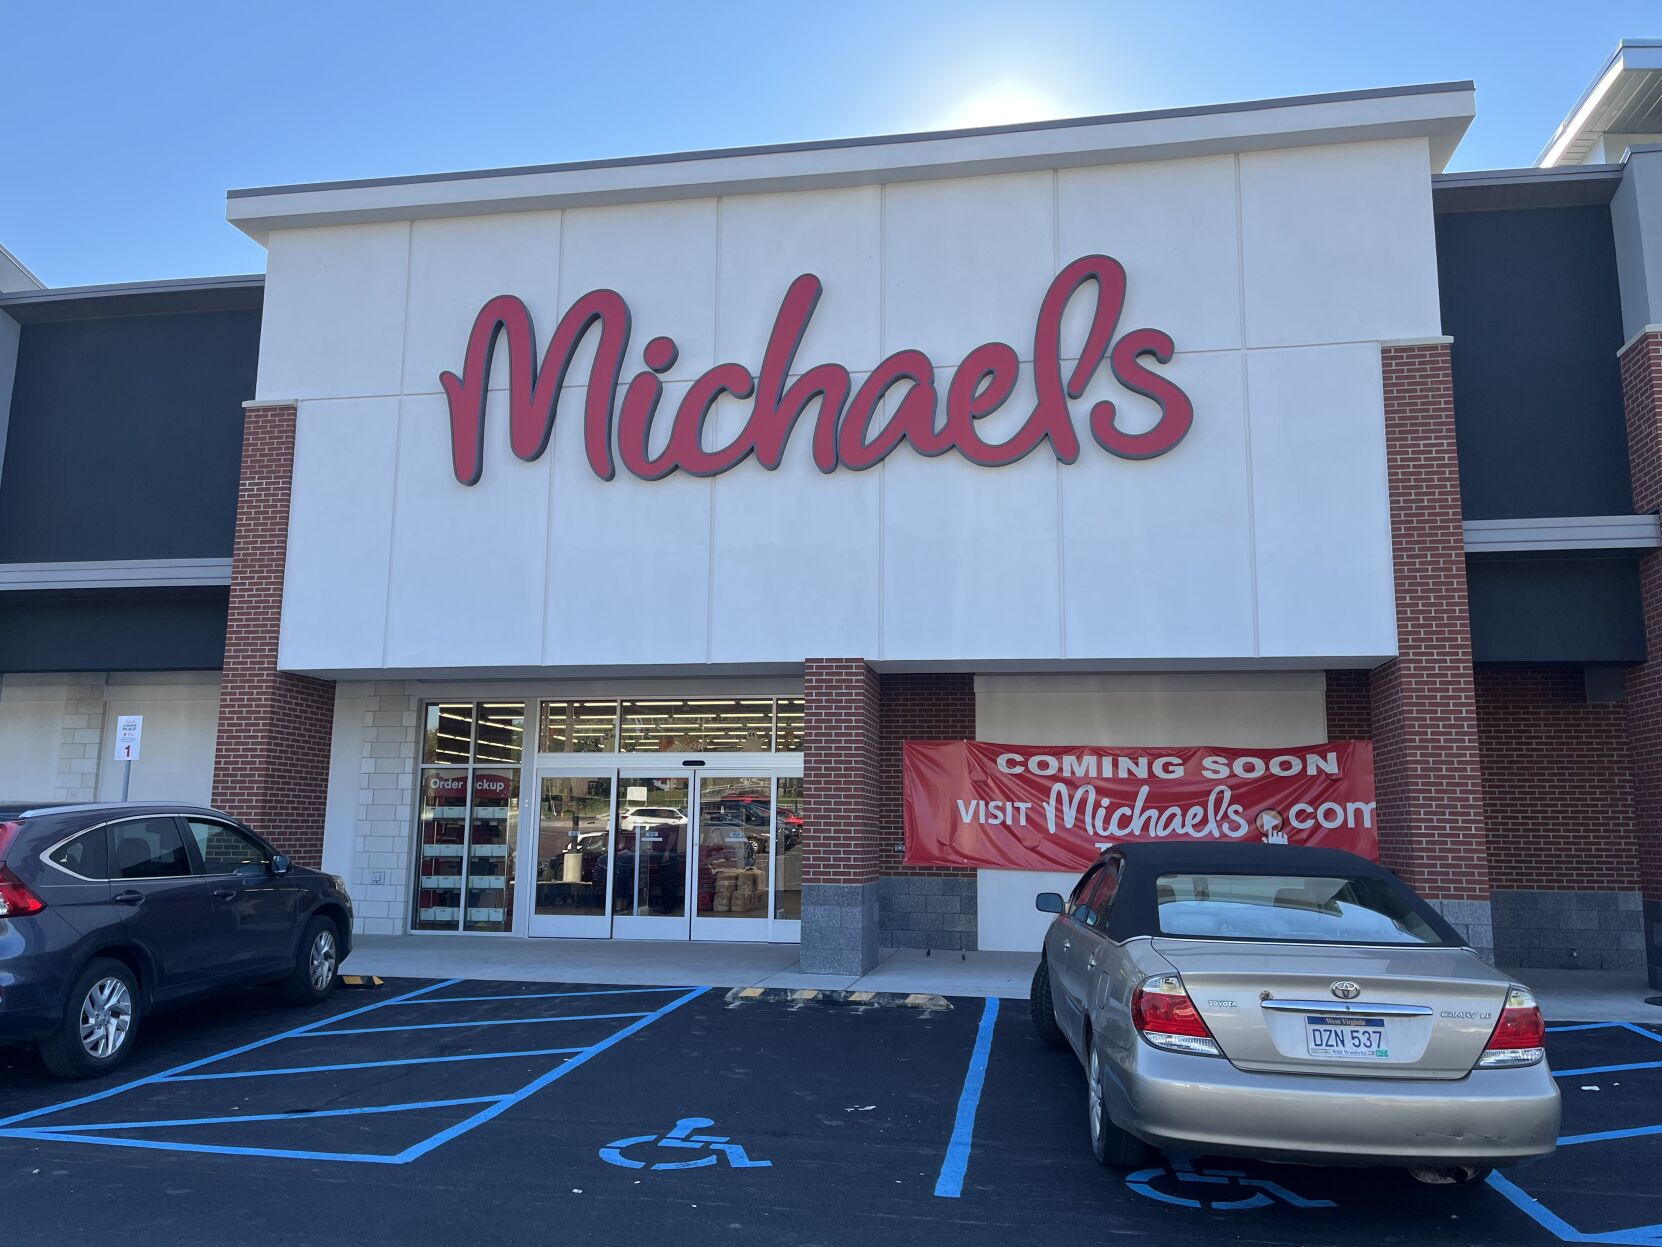 White Hall welcomes Michaels to the Middletown Commons, Local News